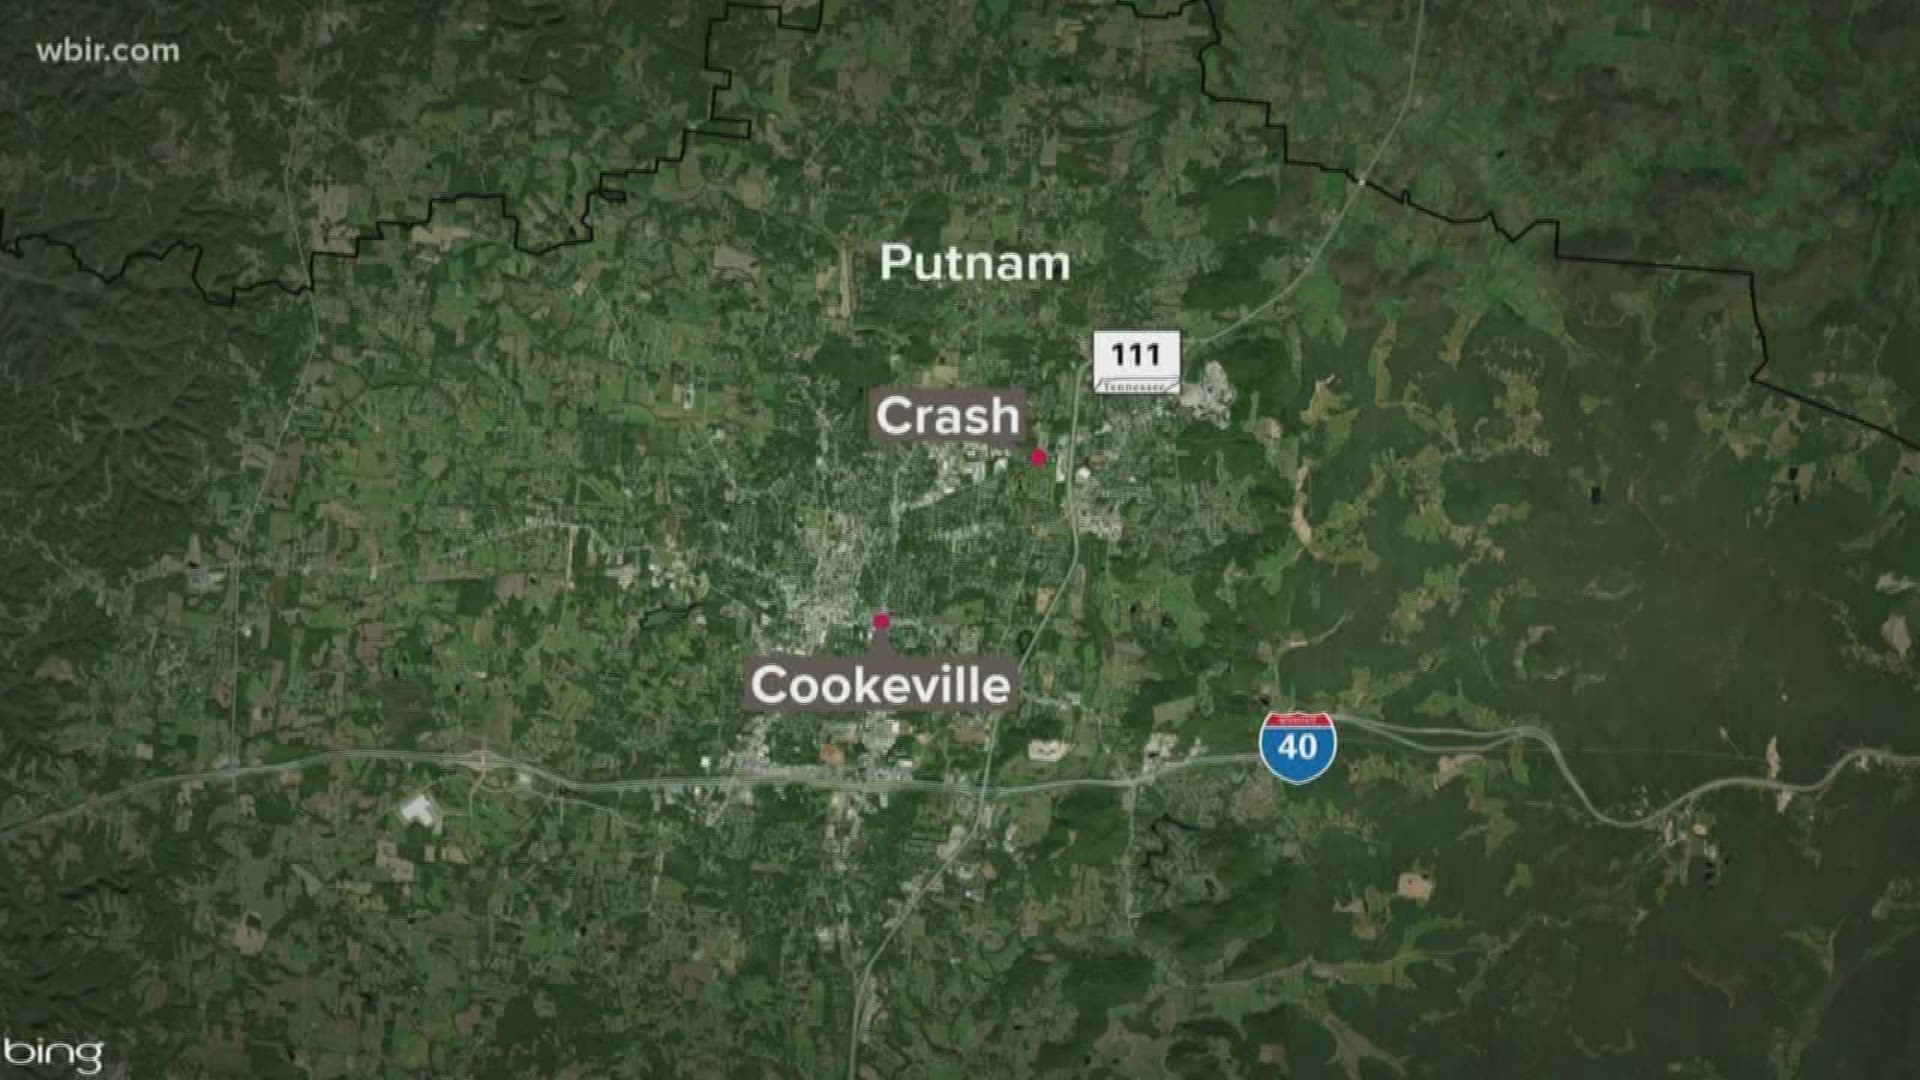 Cookeville Police responded to a crash at 3:25 p.m. on Monday and found six people with injuries. One of them is 4-years-old.